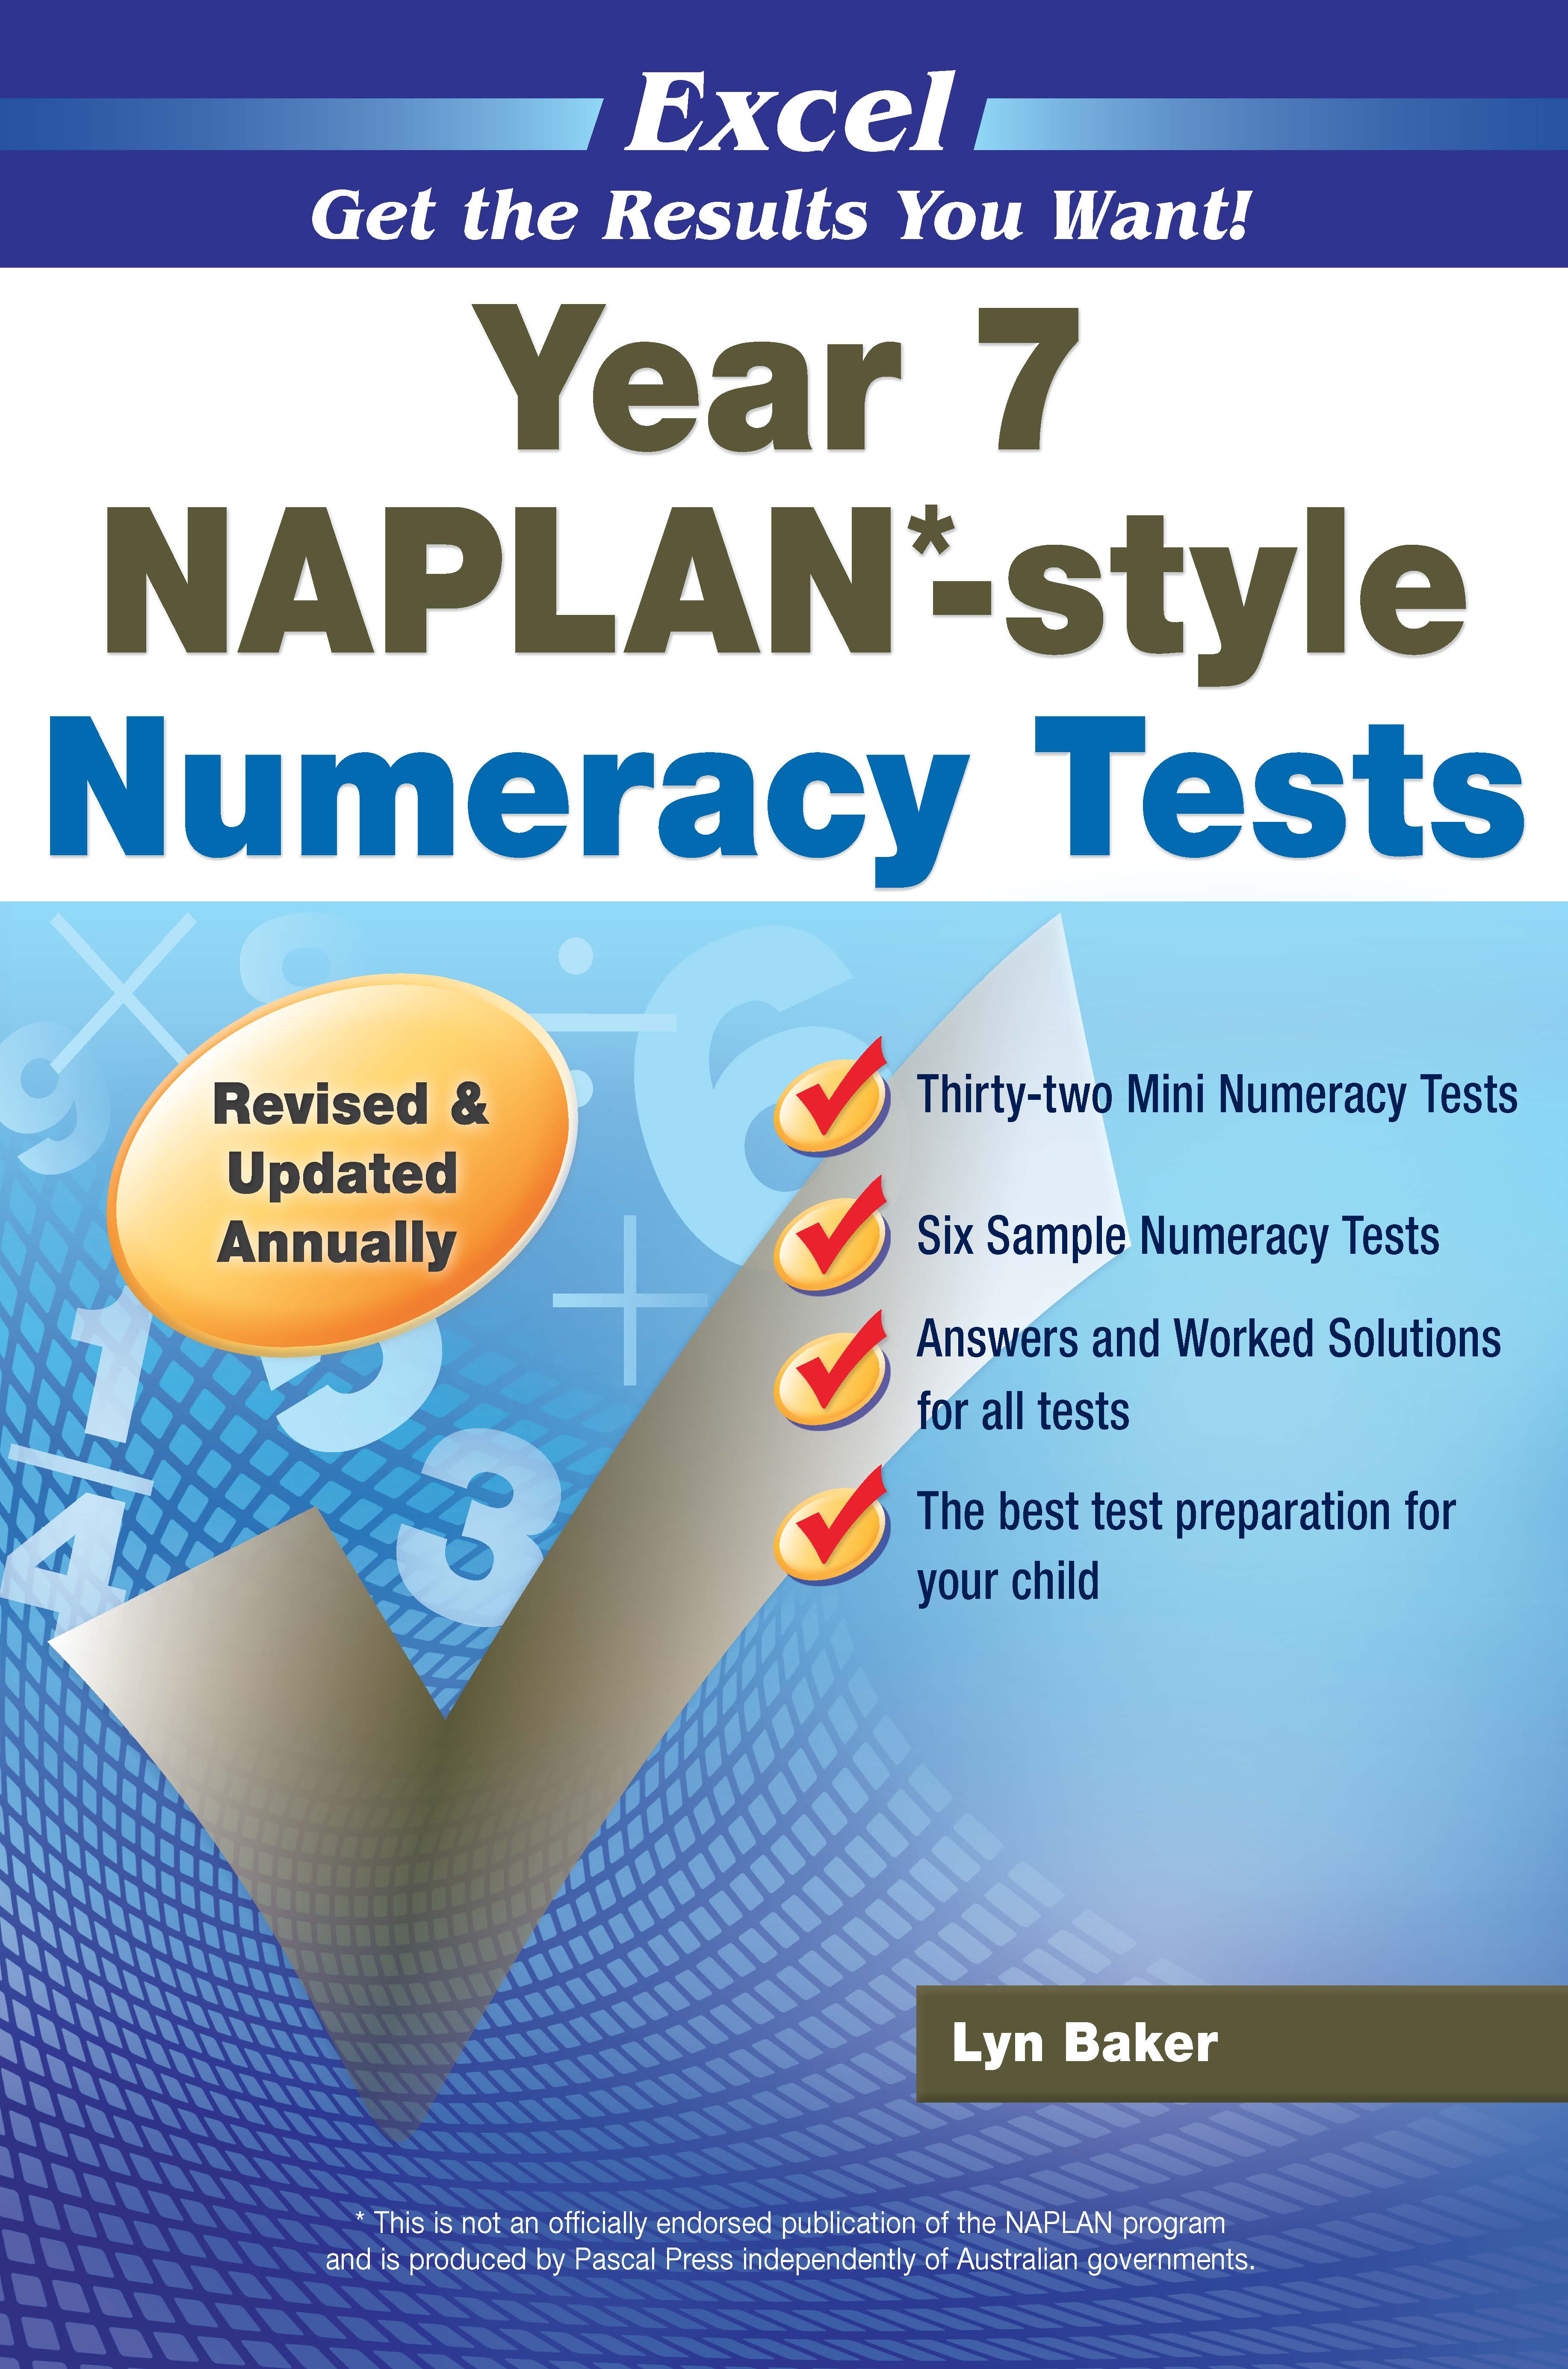 Picture of Excel NAPLAN*-style Numeracy Tests Year 7